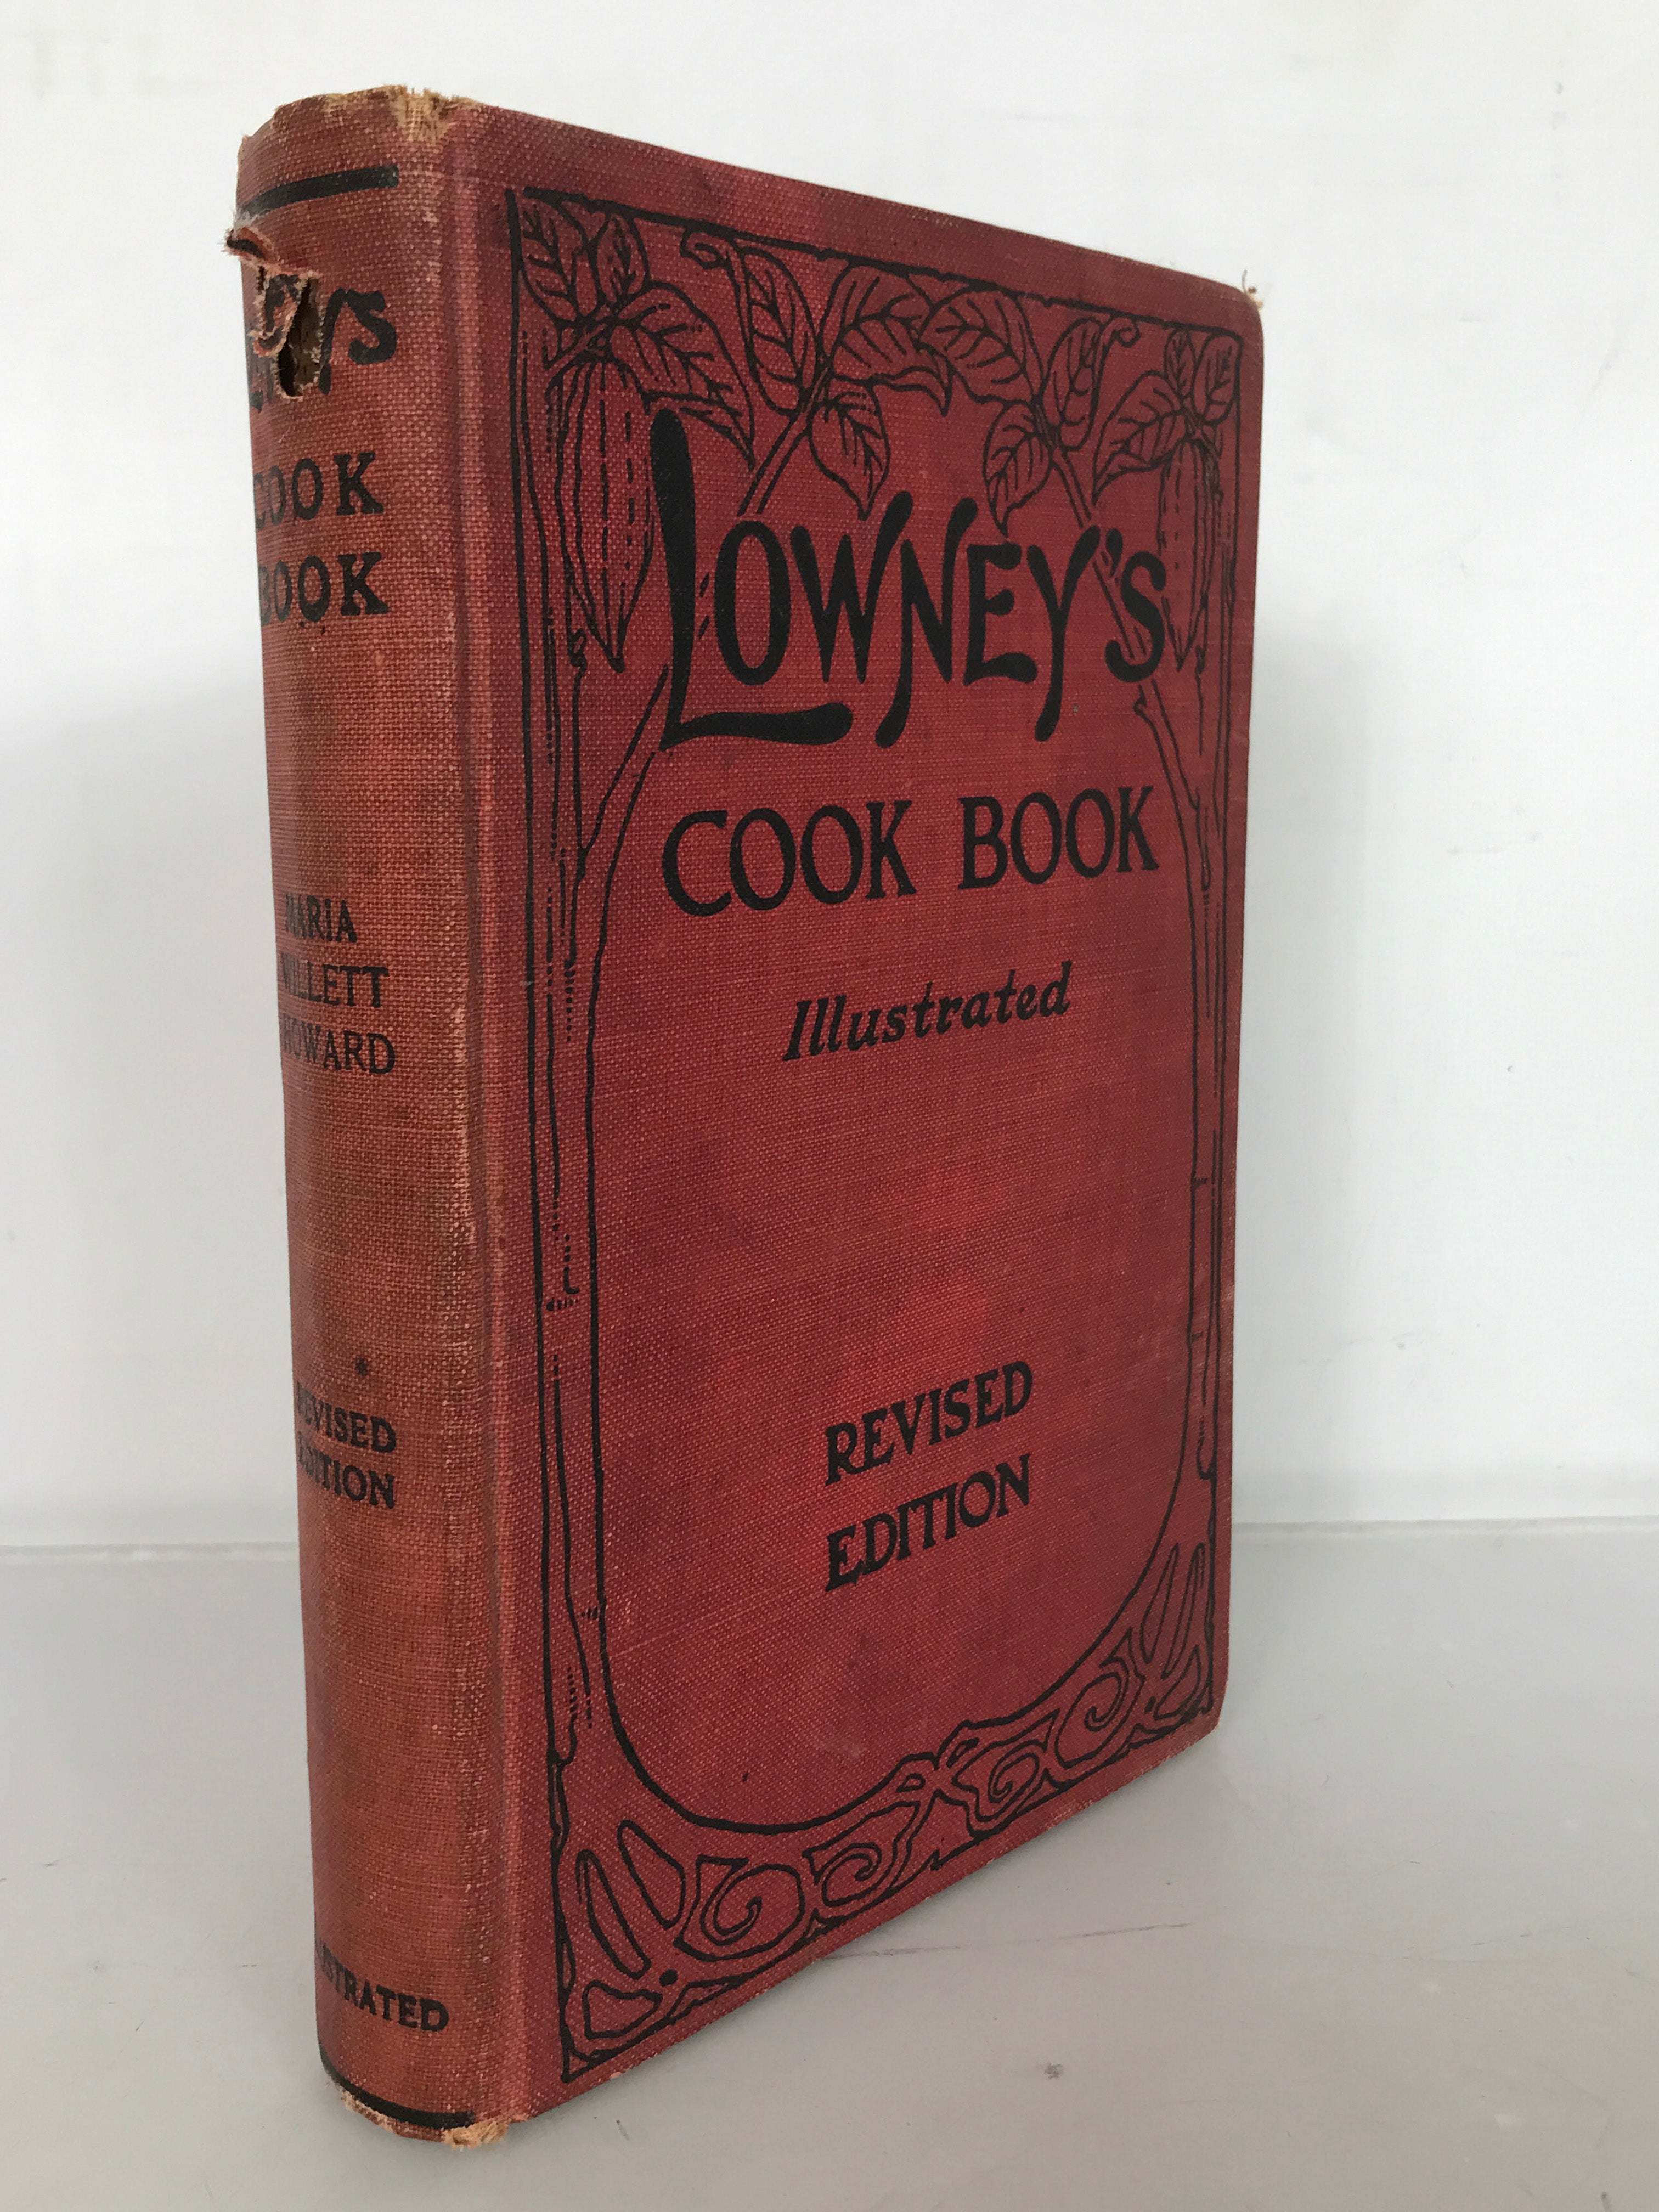 Lowney's Cook Book Illustrated by Maria Willett Howard 1912 HC